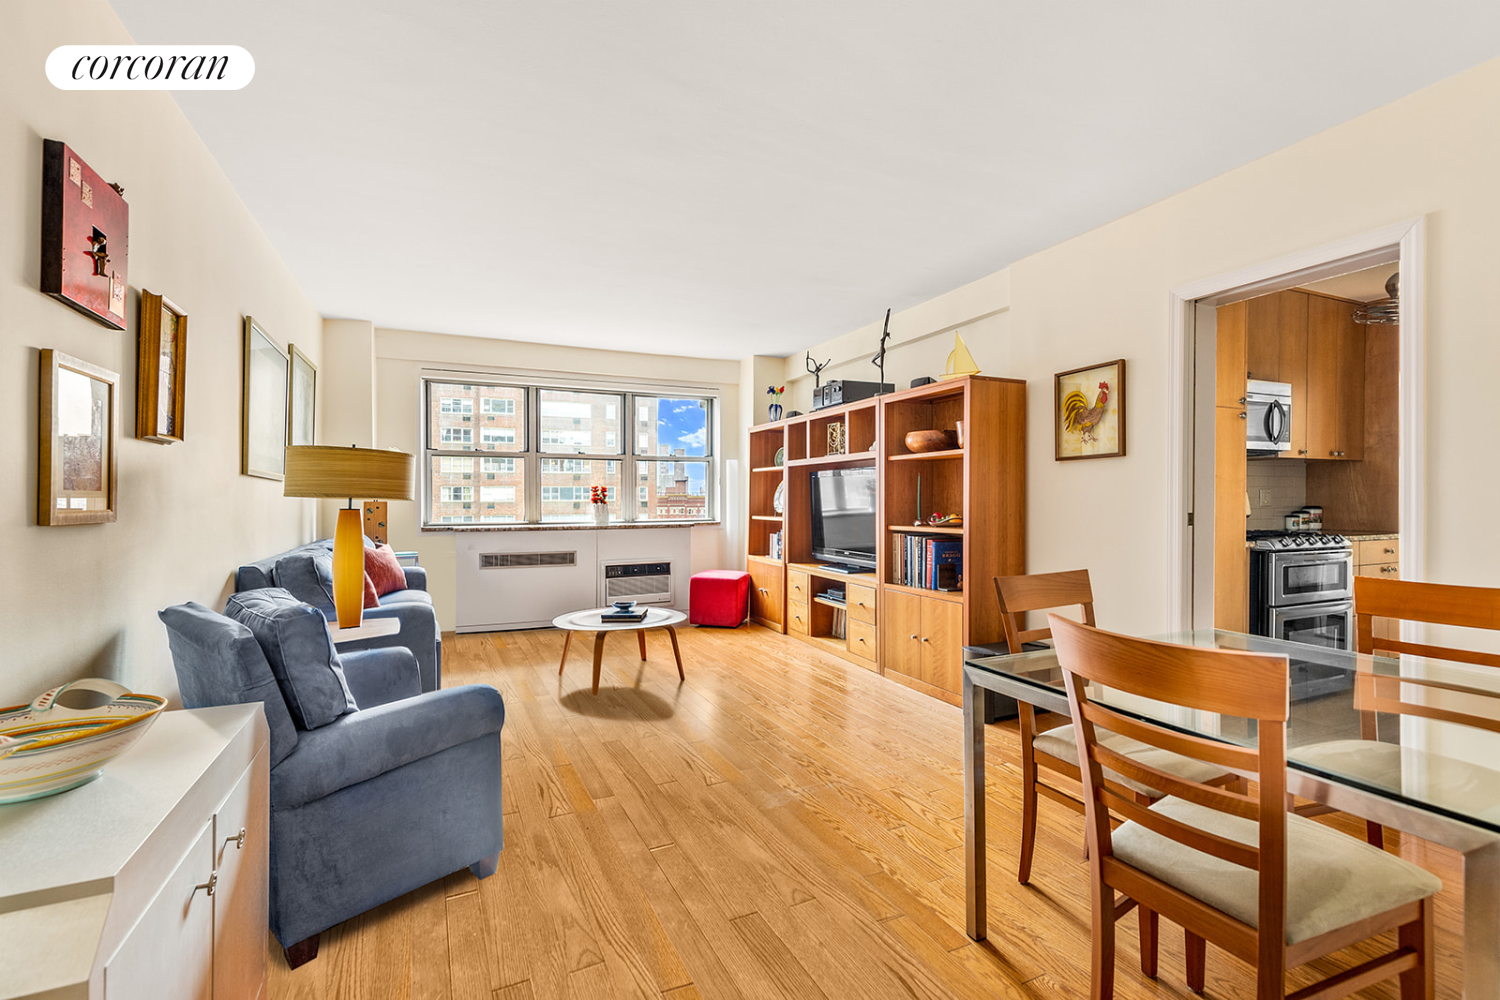 30 West 60th Street 10Xy, Lincoln Sq, Upper West Side, NYC - 2 Bedrooms  
2 Bathrooms  
6 Rooms - 